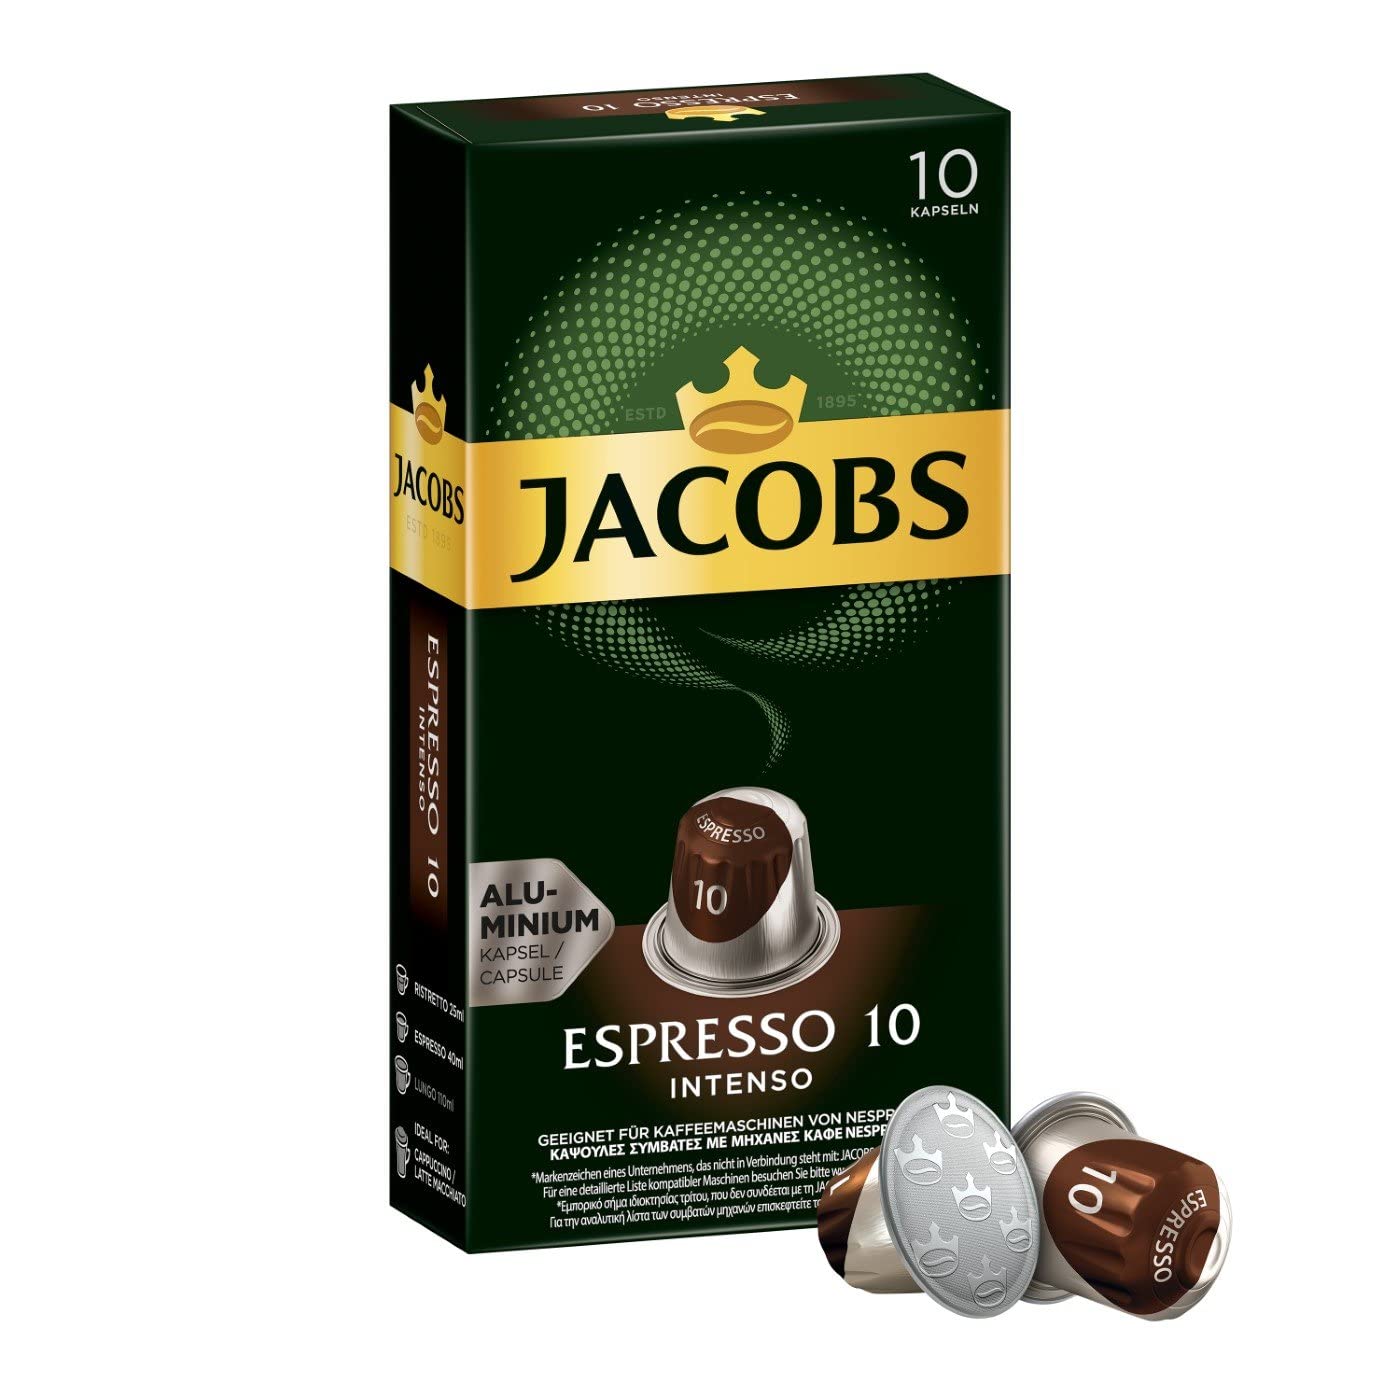 Jacobs Intego Espresso Capsules Intensity 10.100 Nespresso Compatible Coffee Capsules Pack of 10 x 10 drinks